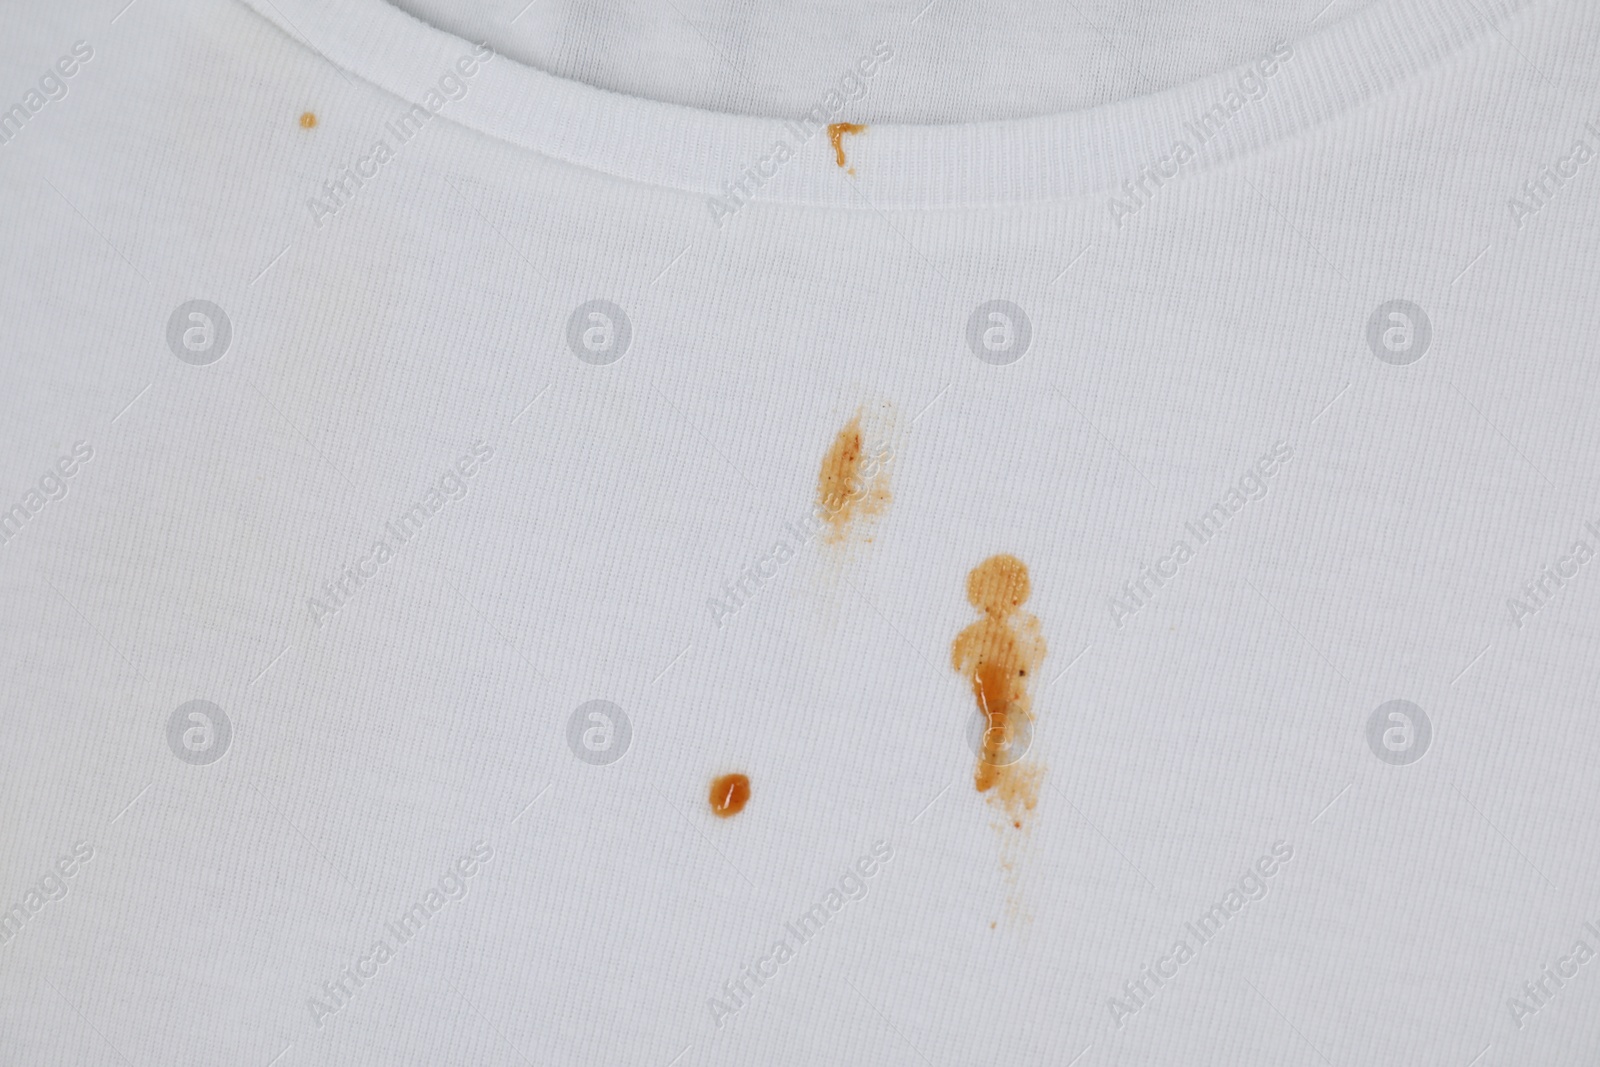 Photo of Stains of sauce on white t-shirt, top view